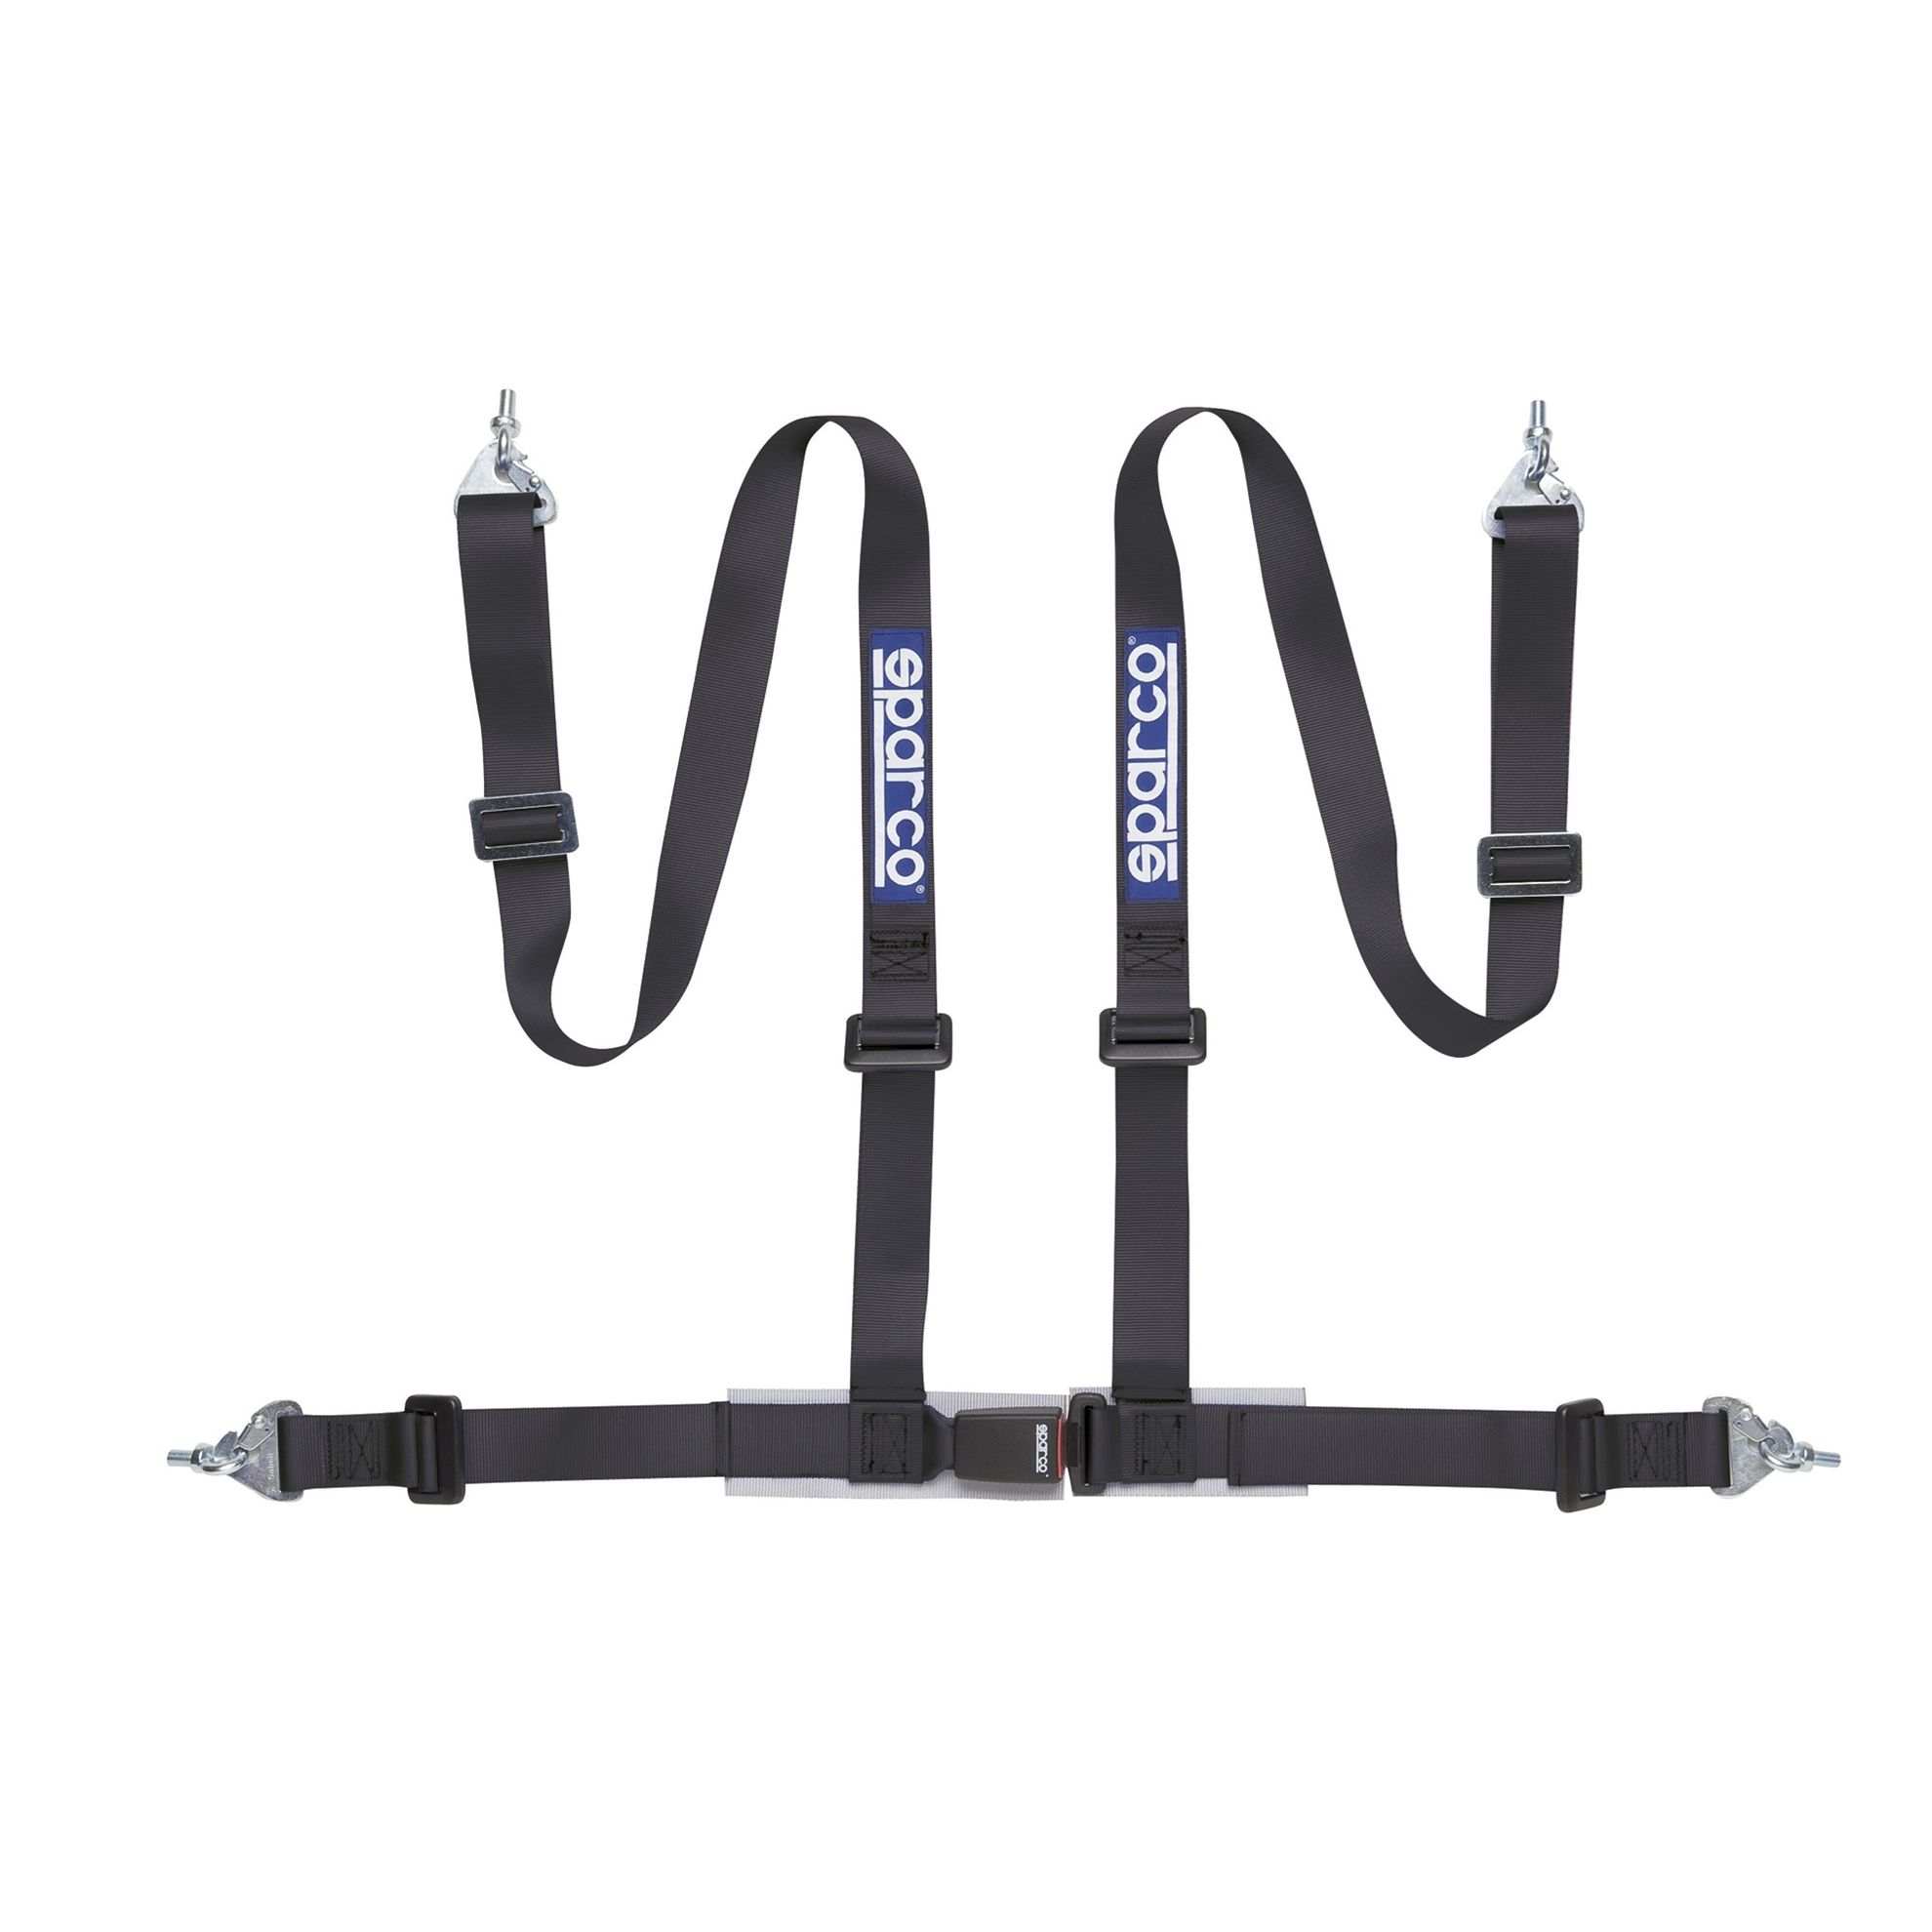 Sparco Tuner Harness 4-Point Snap-In Belt Width: 2" Black